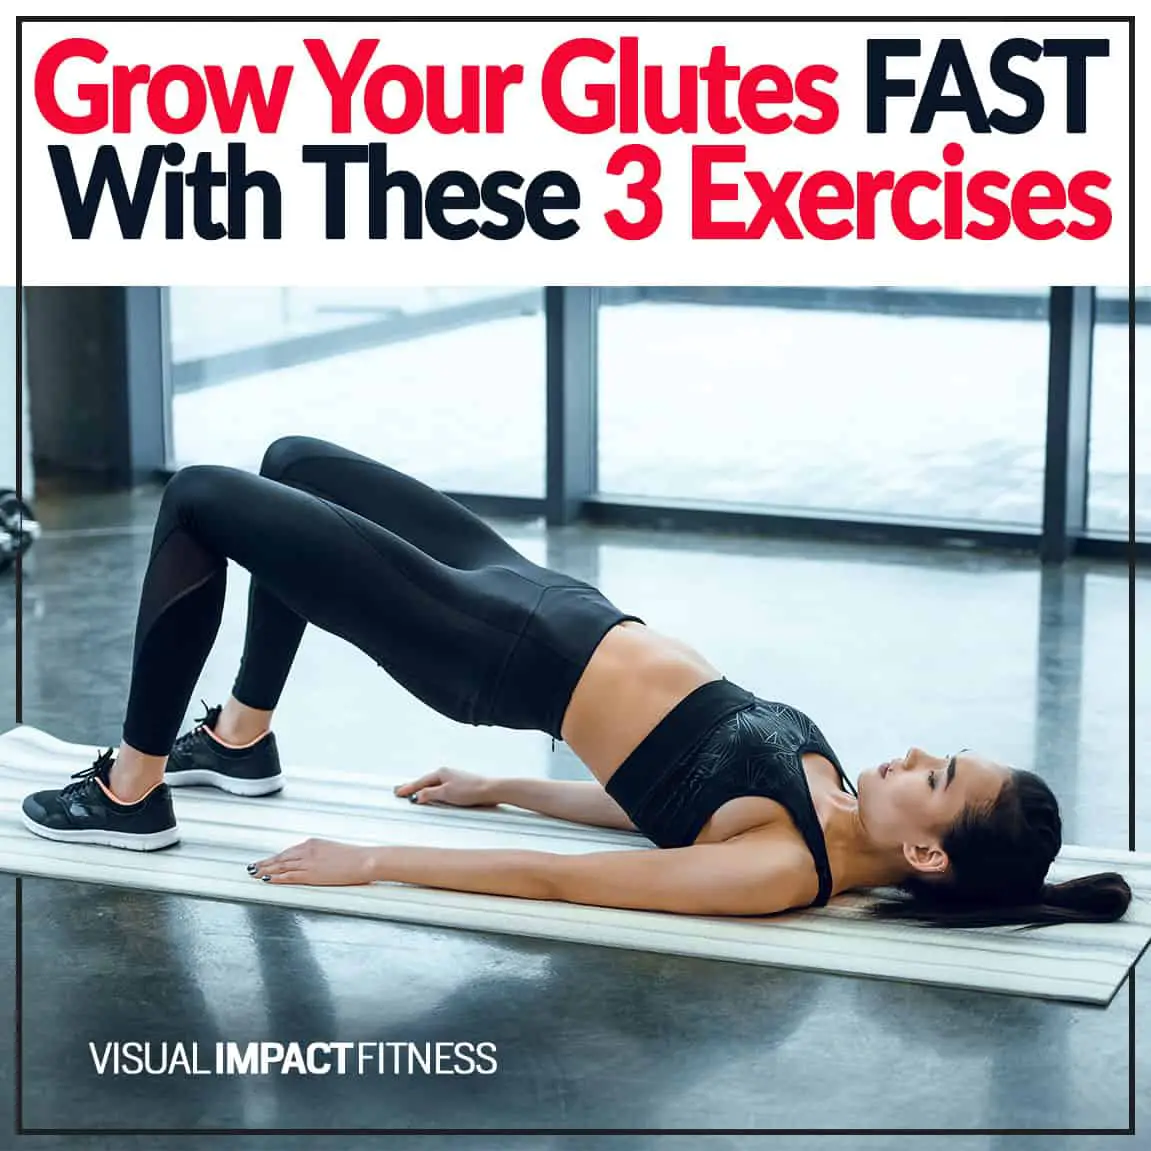 Grow Your Glutes FAST With These 3 Exercises